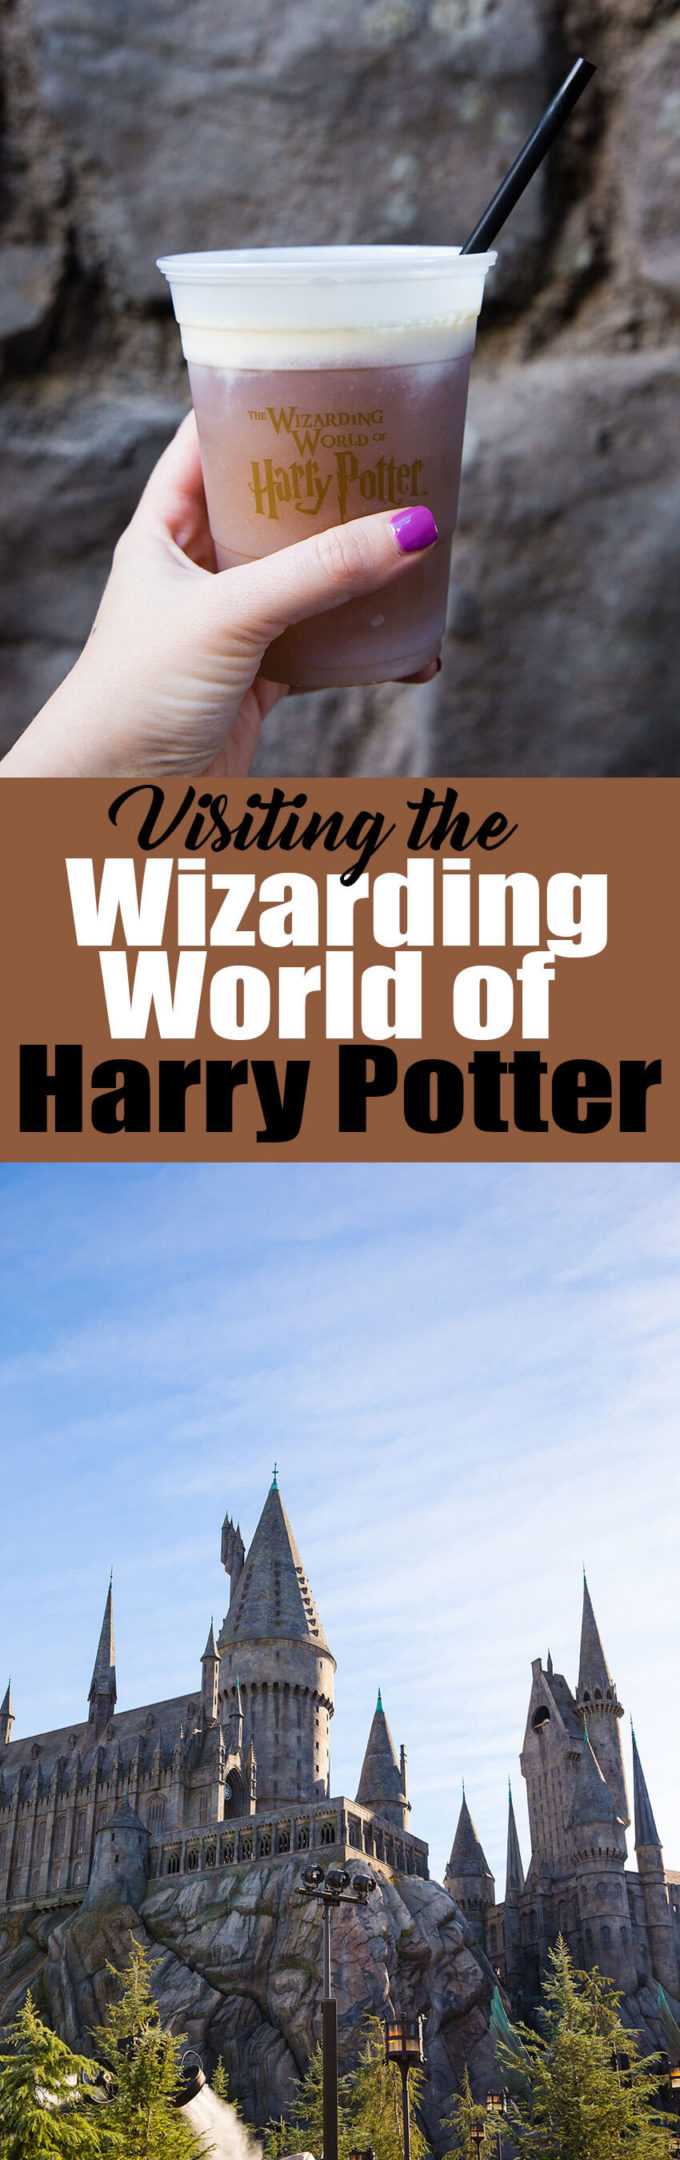 Everything you need to know to have a great visit to the Wizarding World of Harry Potter at Universal Studios Hollywood